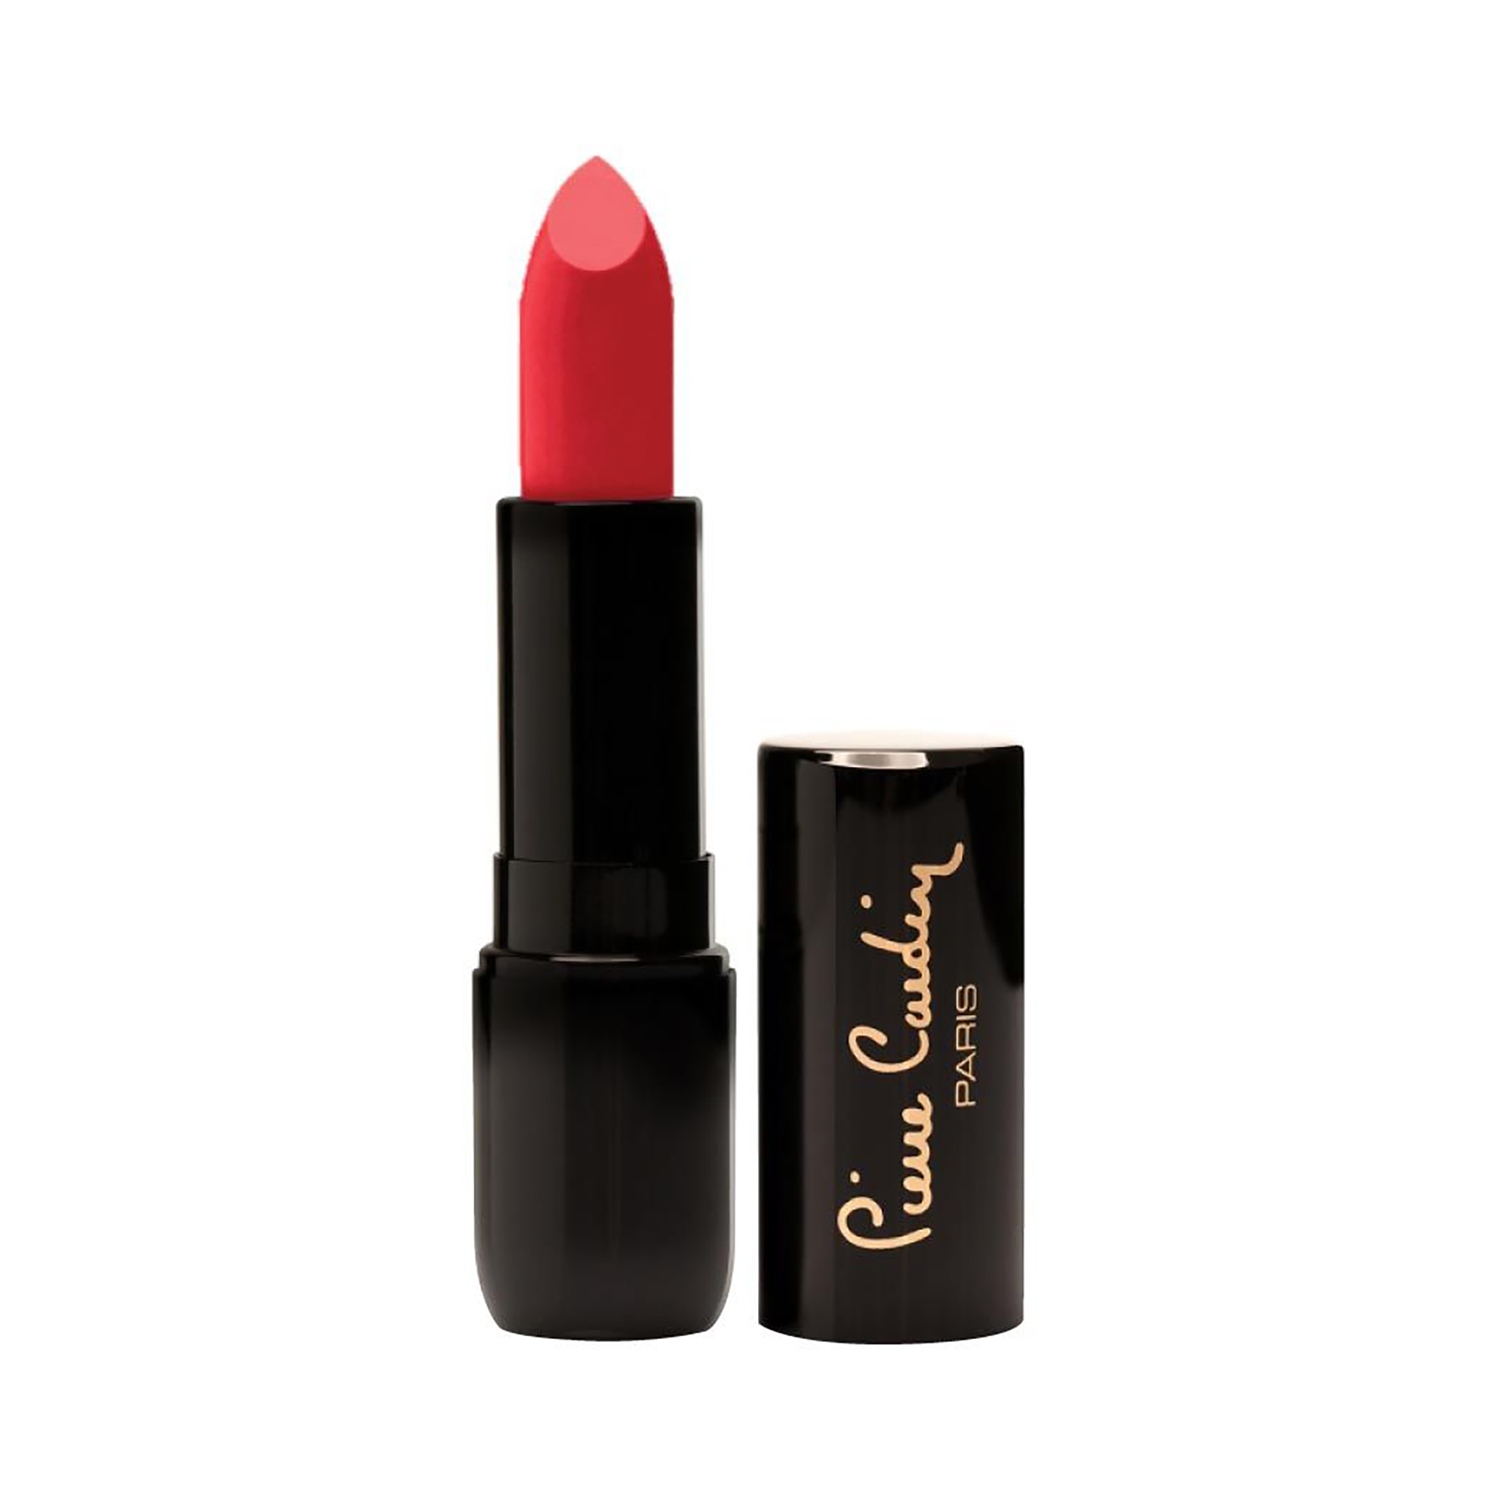 Pierre Cardin Paris | Pierre Cardin Paris Porcelain Edition Rouge Lipstick - 243 Blood Red (4g)